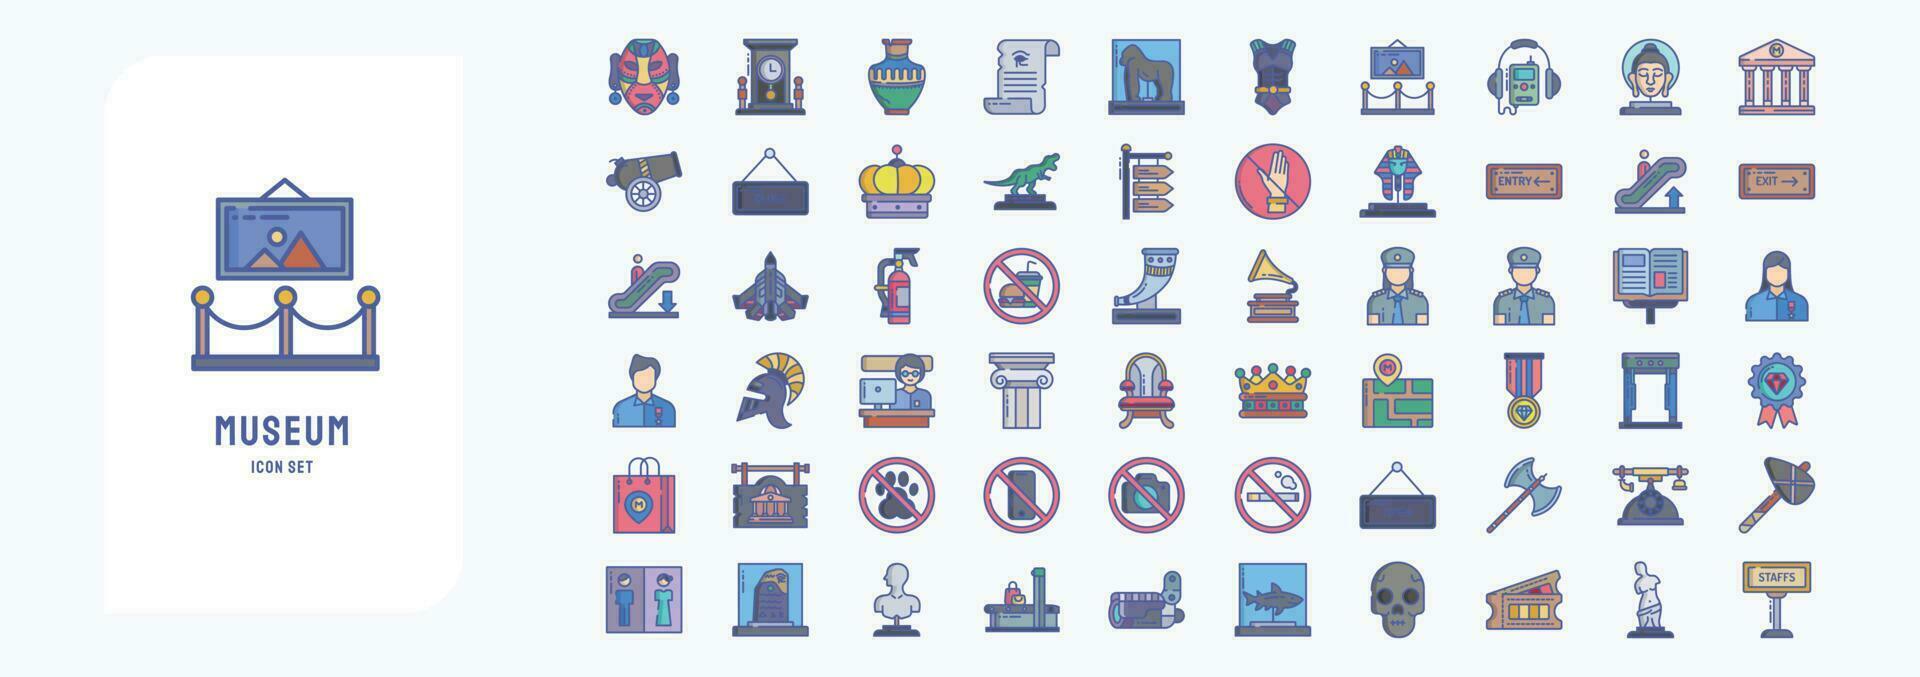 Museum, including icons like African Mask, Ancient jar, Scroll, Art and more vector